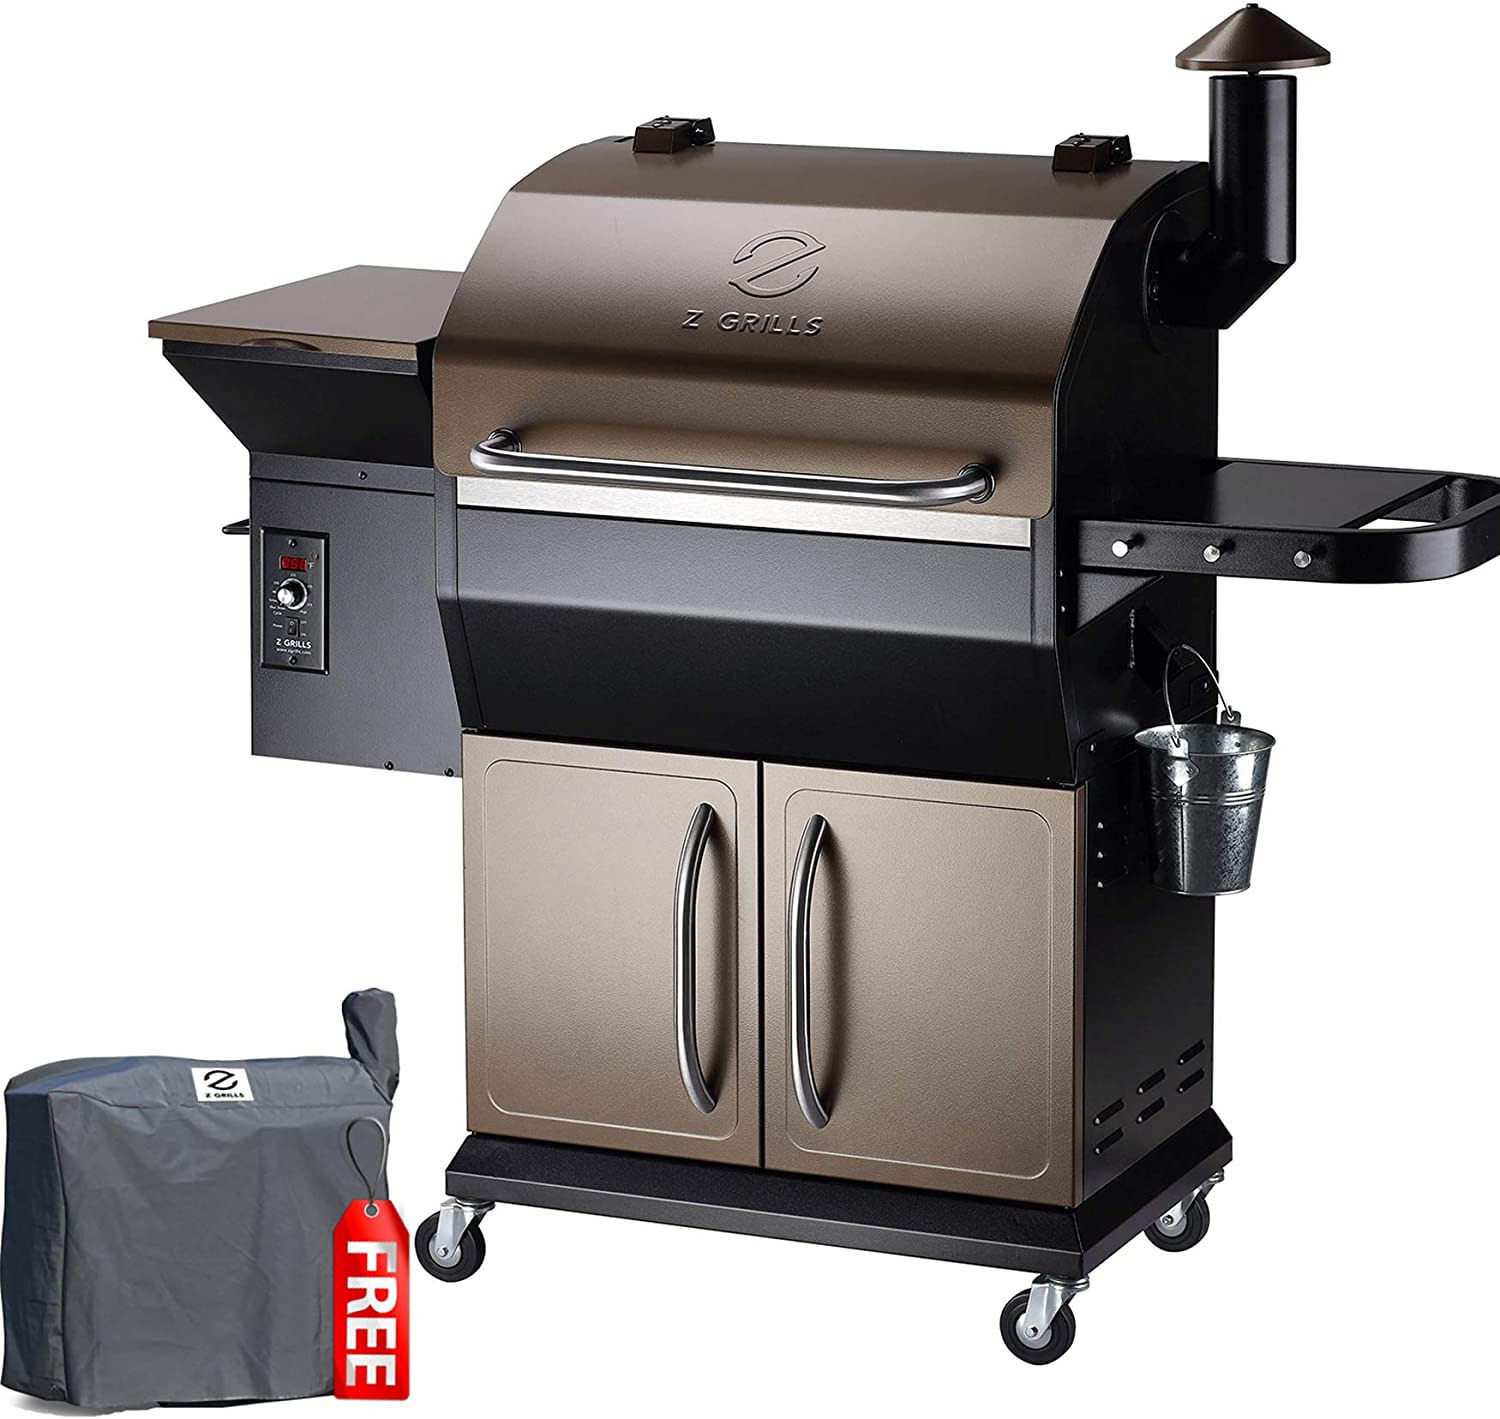 Z GRILLS 1000D Smart Wood Pellet Grill 8 in 1 Outdoor BBQ Smoker 1060 SQ Inches Cooking Area with Cabinet Barbecue Grill Bronze - image 1 of 8